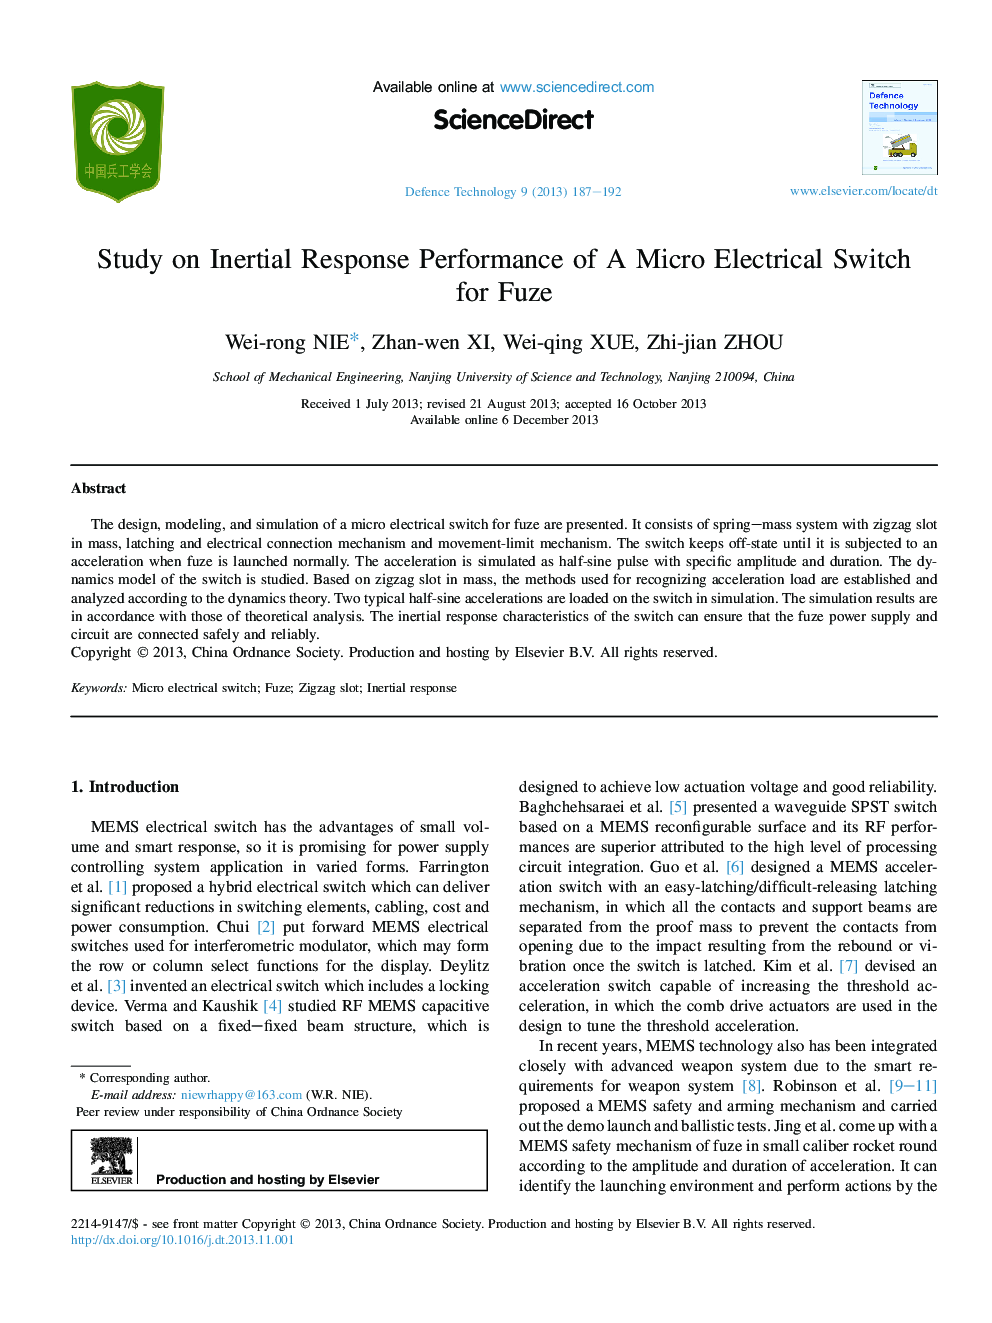 Study on Inertial Response Performance of A Micro Electrical Switch for Fuze 